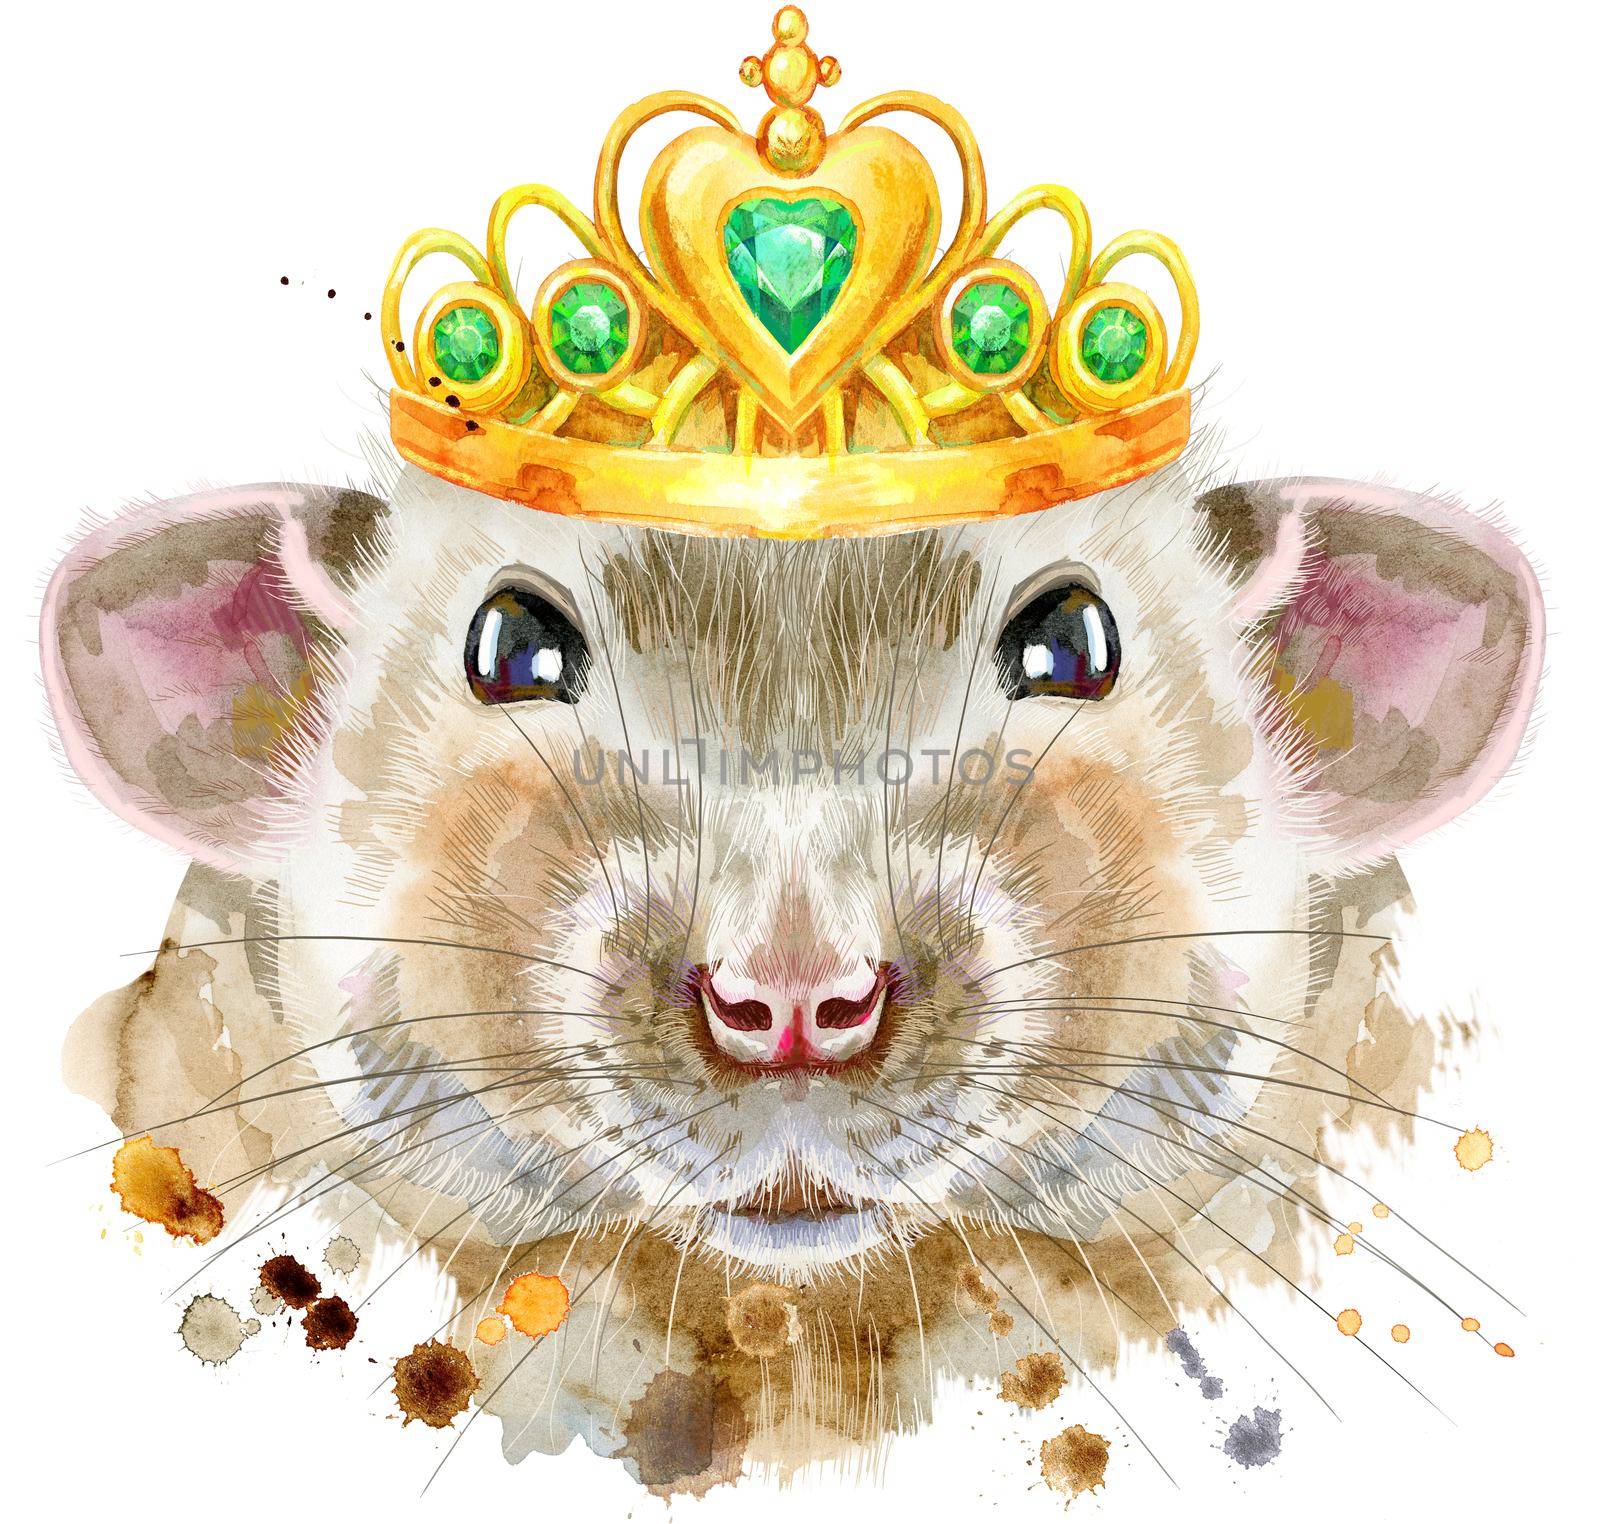 Cute rat with golden crown for t-shirt graphics. Watercolor rat illustration